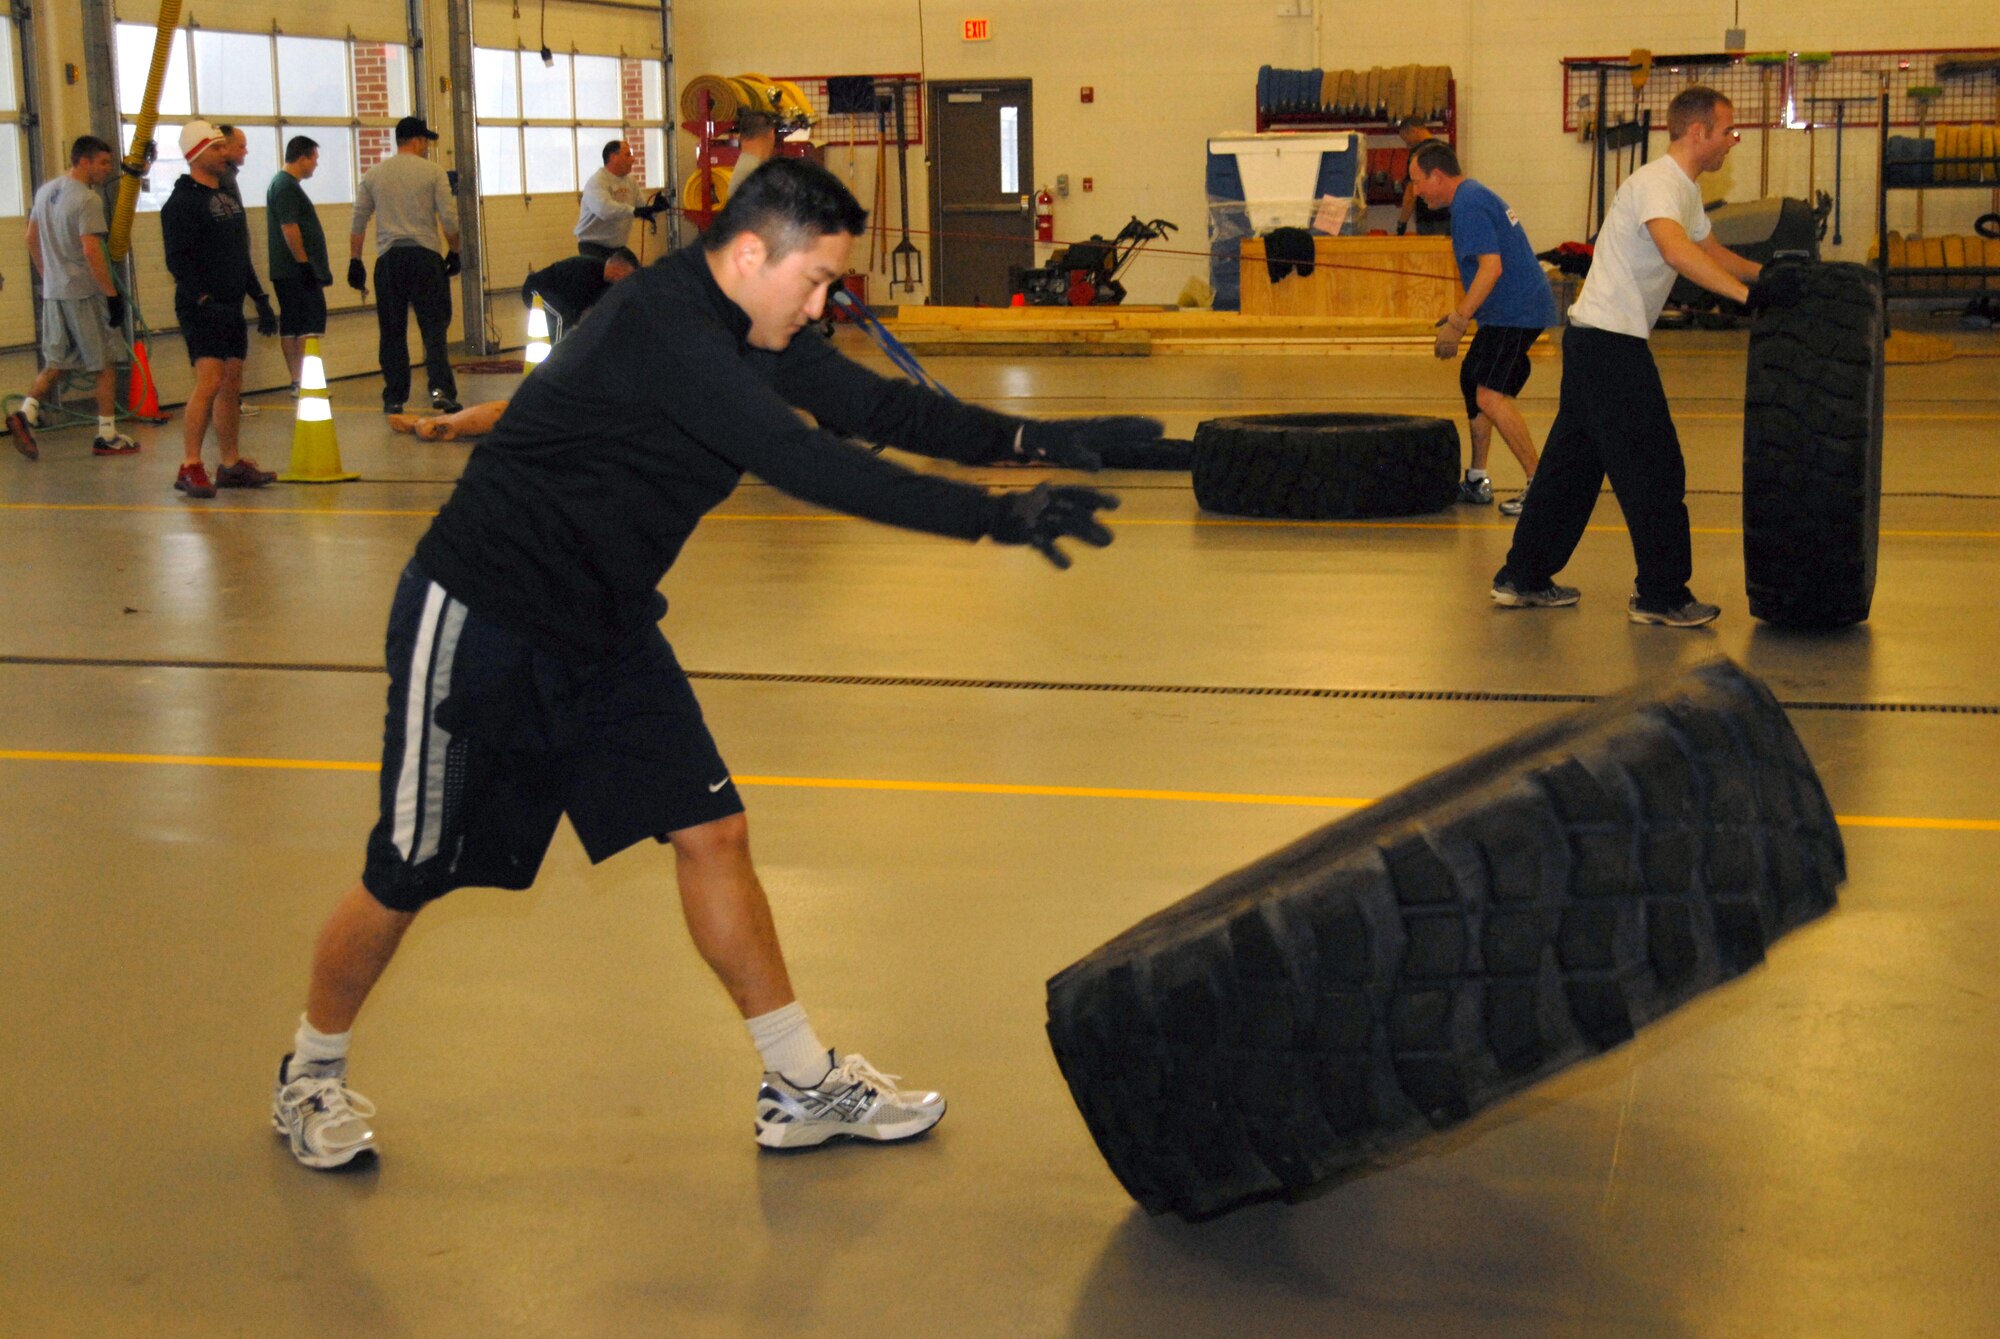 Senior Airman Danny Lee, a fire fighter with the 178th Civil Engineer Squadron flips a tire as part of the fire fighter's cicuit training March 4.at the Springfield Ohio Air National Guard base.
The tire flip was part of a 15 minute, five station circuit program that is conducted on Unit Training Assembly weekends.